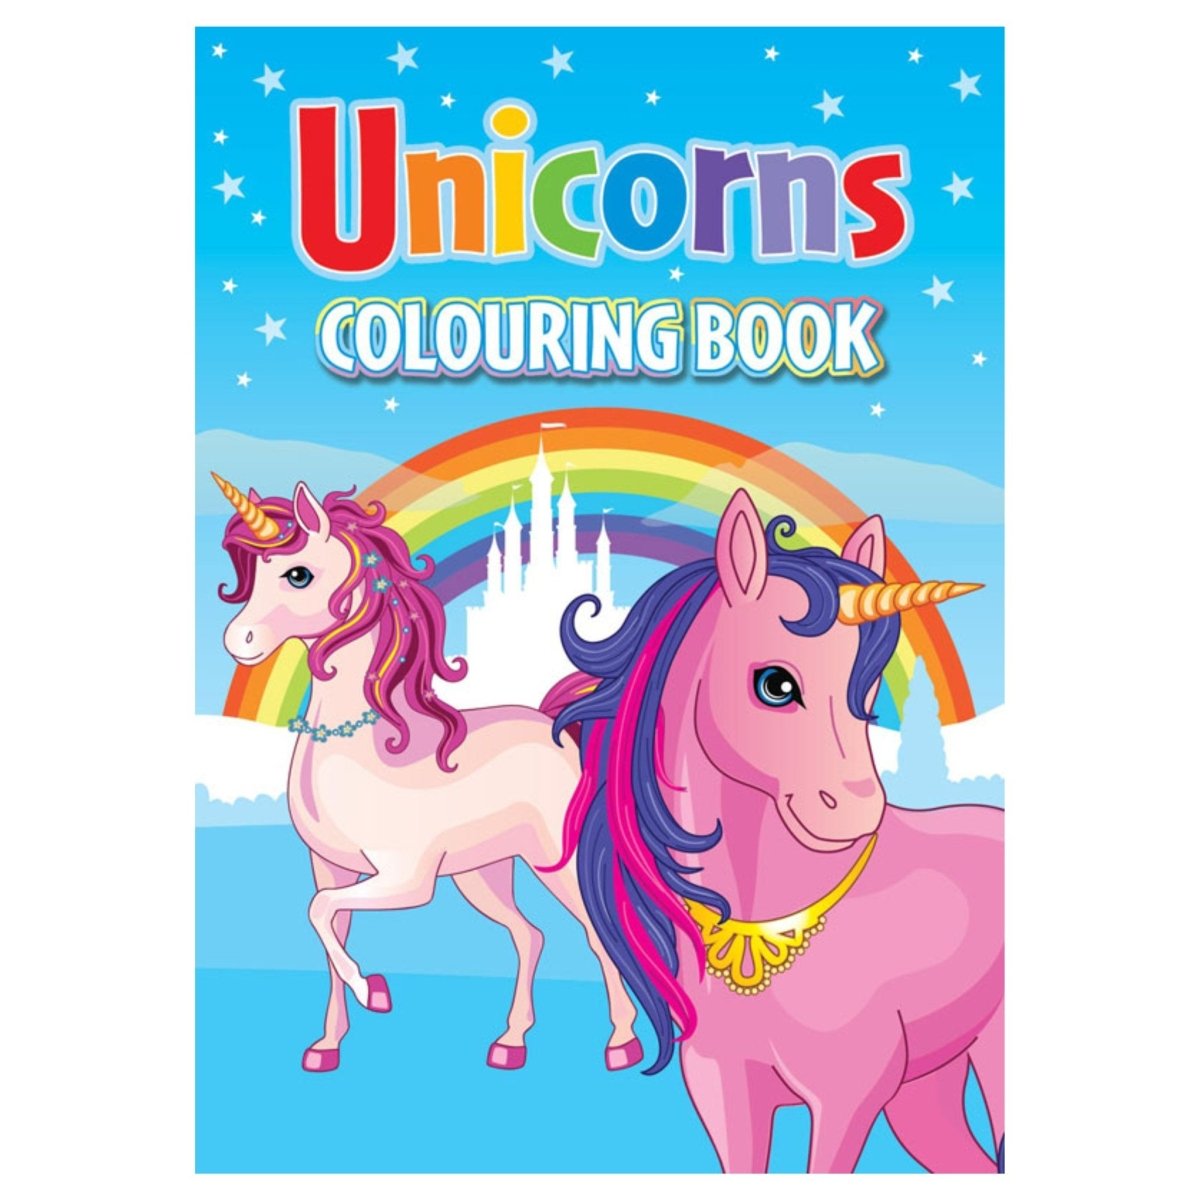 Unicorns Colouring Book - Kids Party Craft